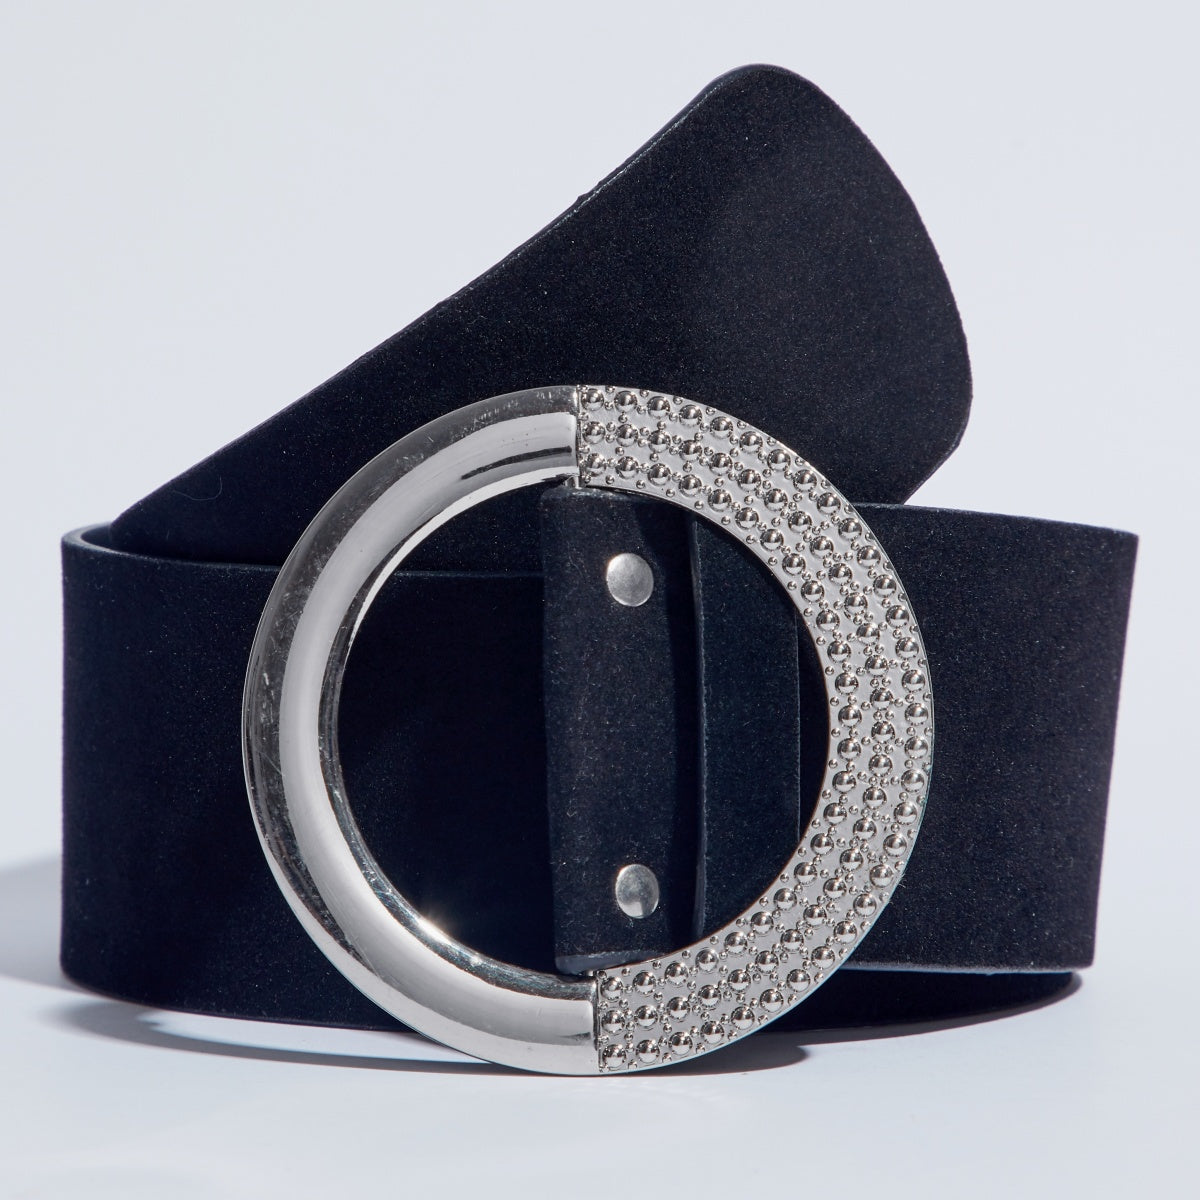 Afterparty Thick Belt by Madish